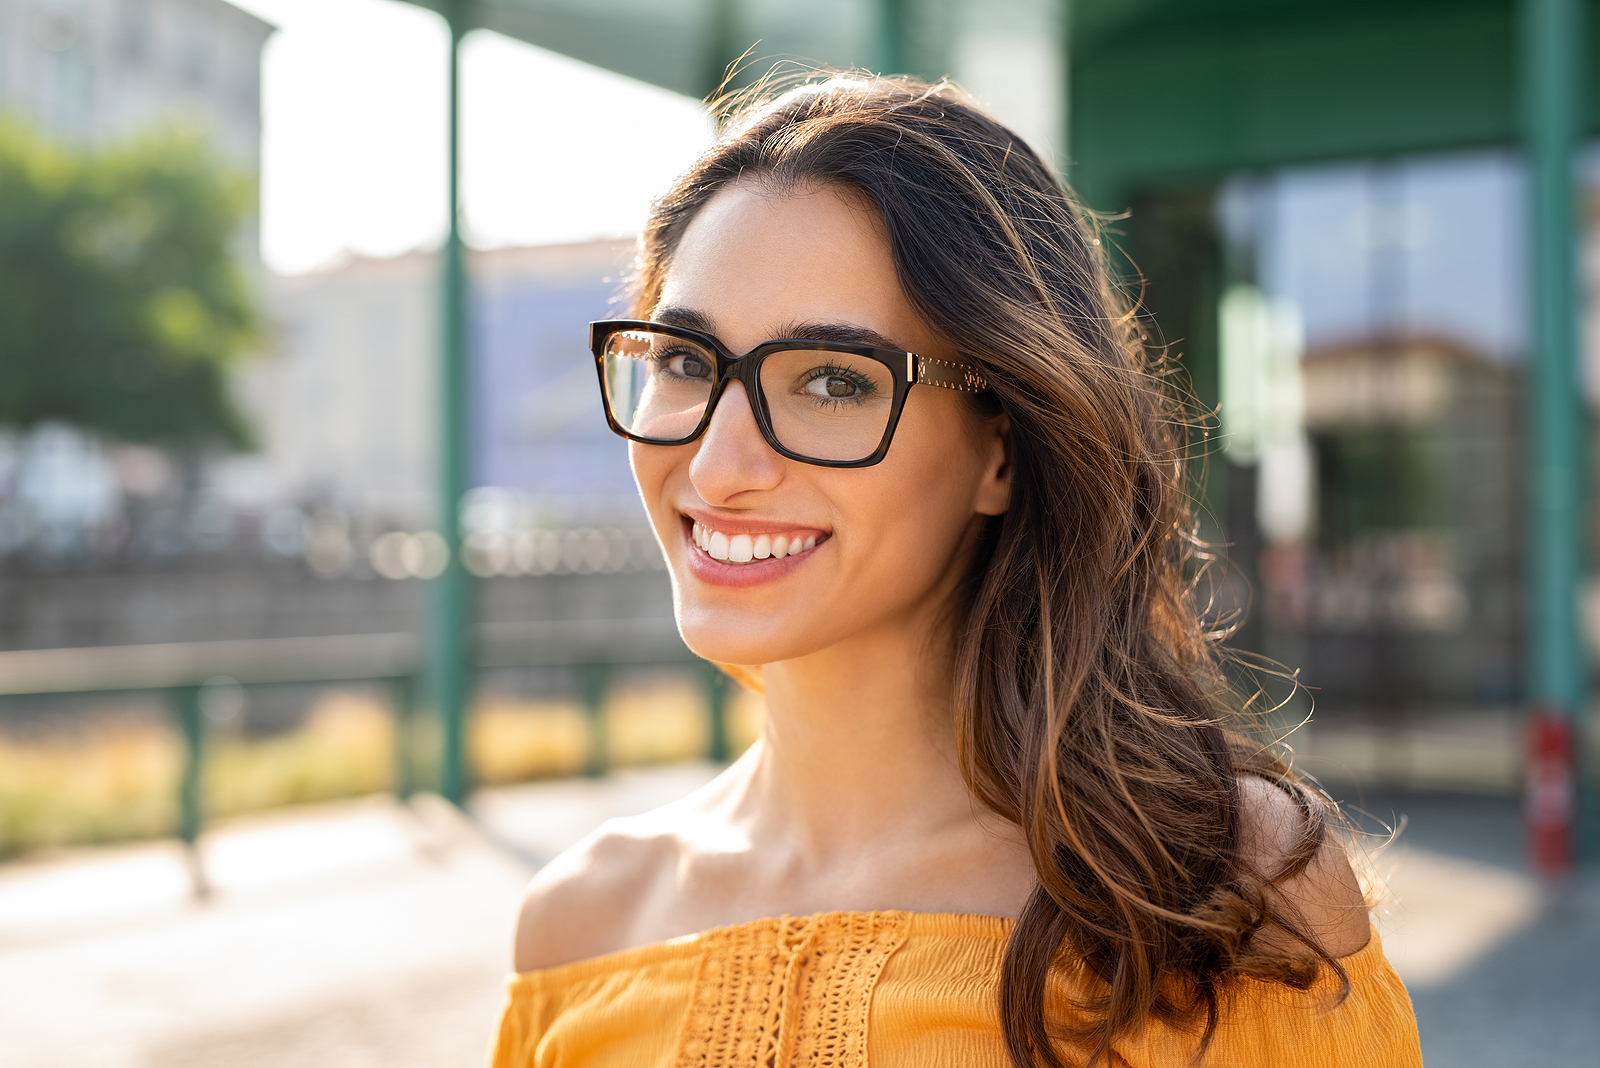 Portrait of carefree young woman smiling and looking at camera with urban background. Cheerful latin girl wearing eyeglasses in the city. Happy brunette woman with long hair and spectacles smiling.